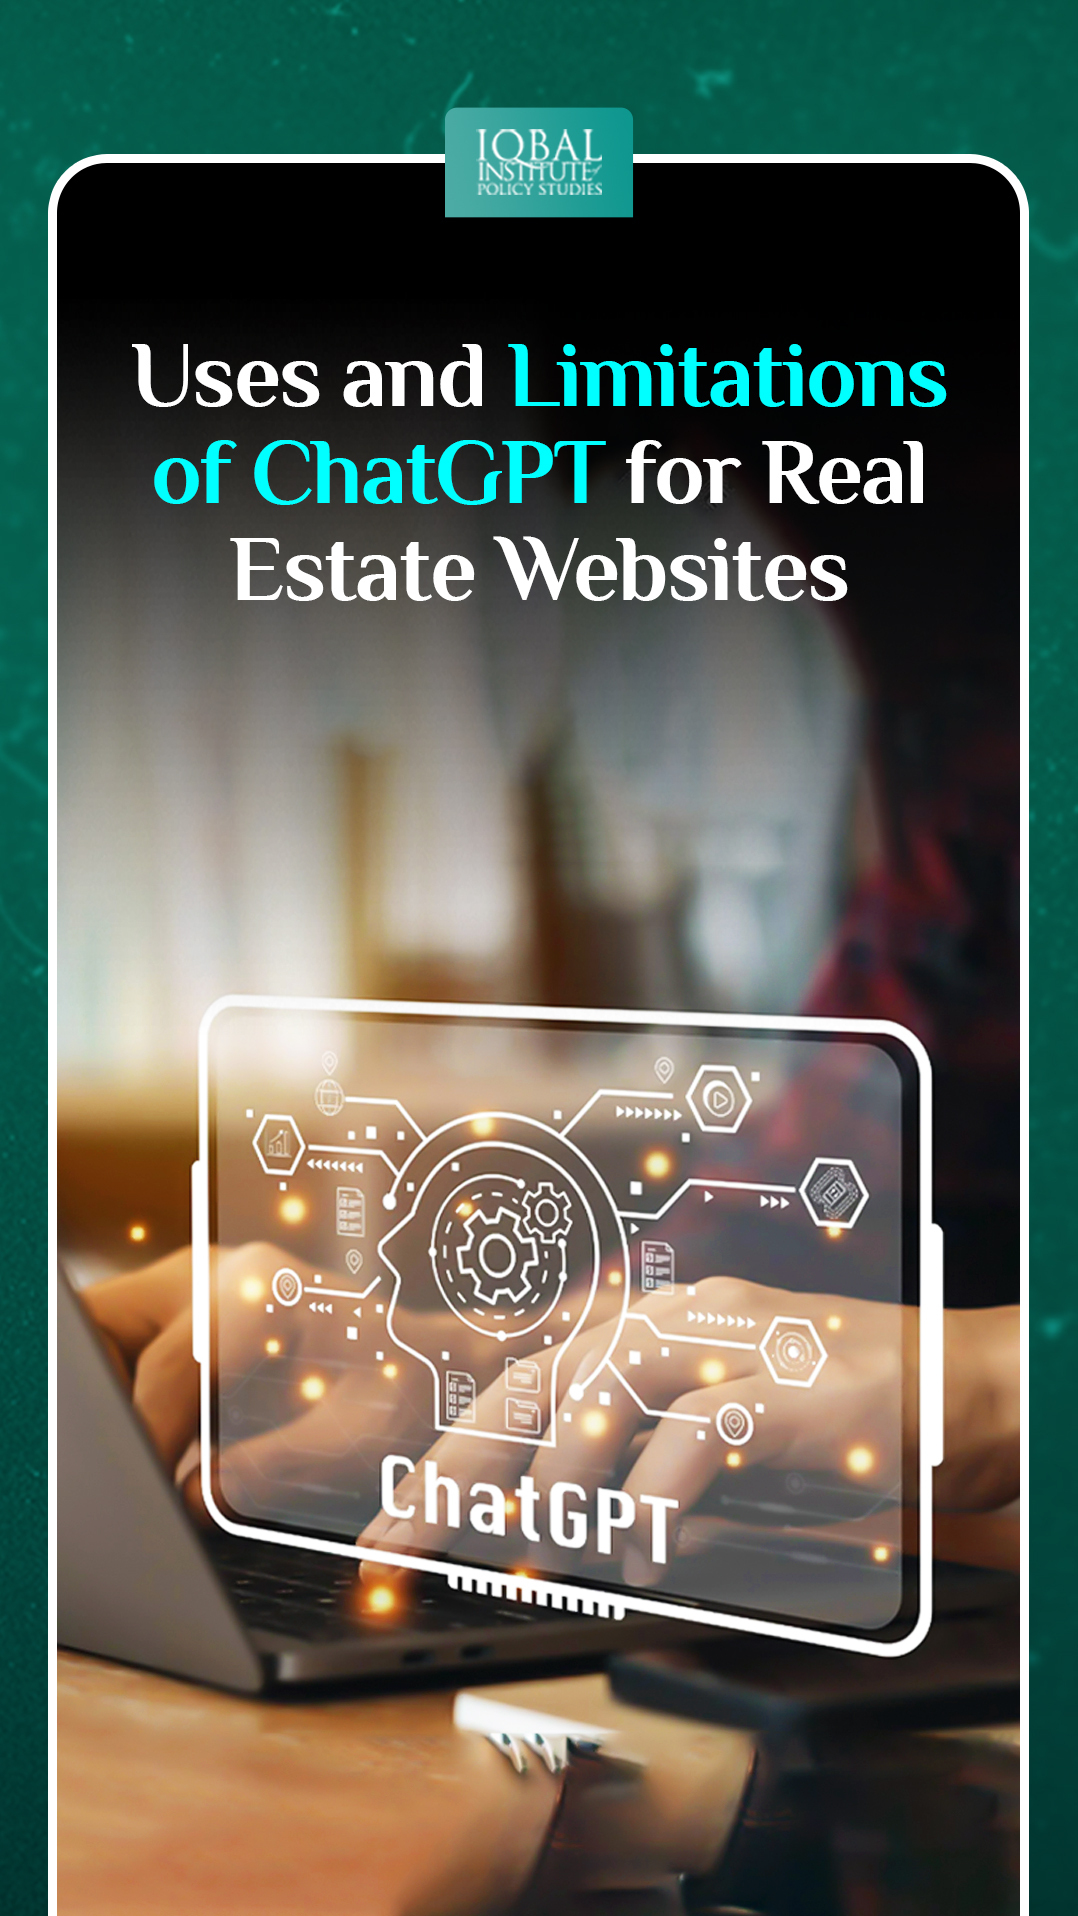 Uses and Limitations of ChatGPT for Real Estate Websites